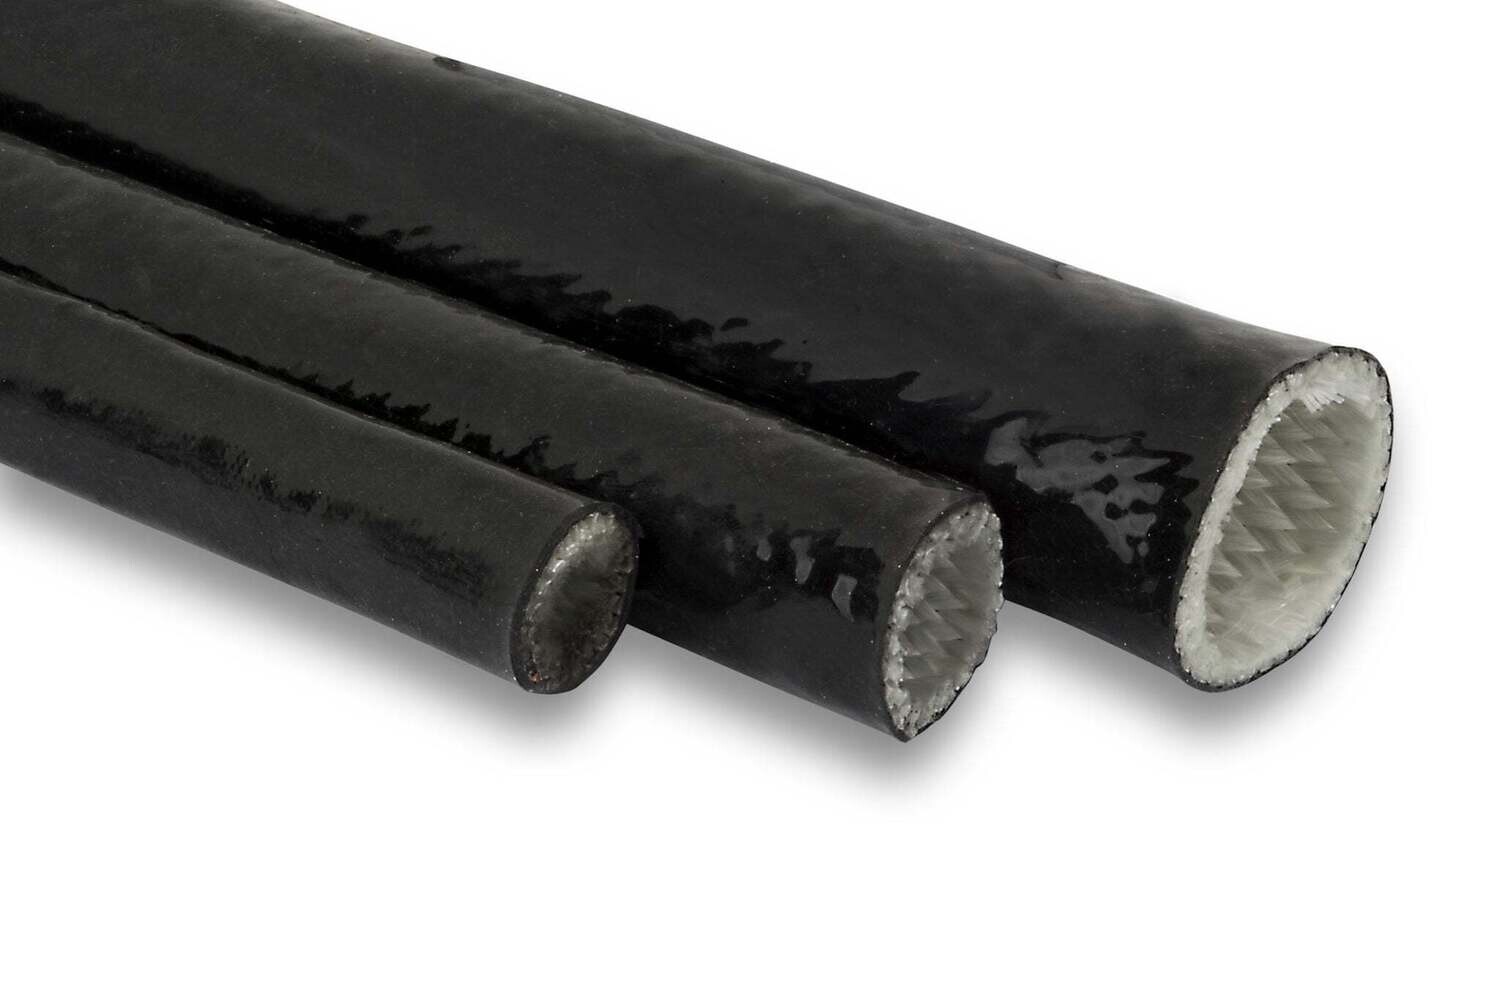 Black Silicon High Heat Sleeve - 25mm, 2.0m Multiple Qty will come on a continuous Roll